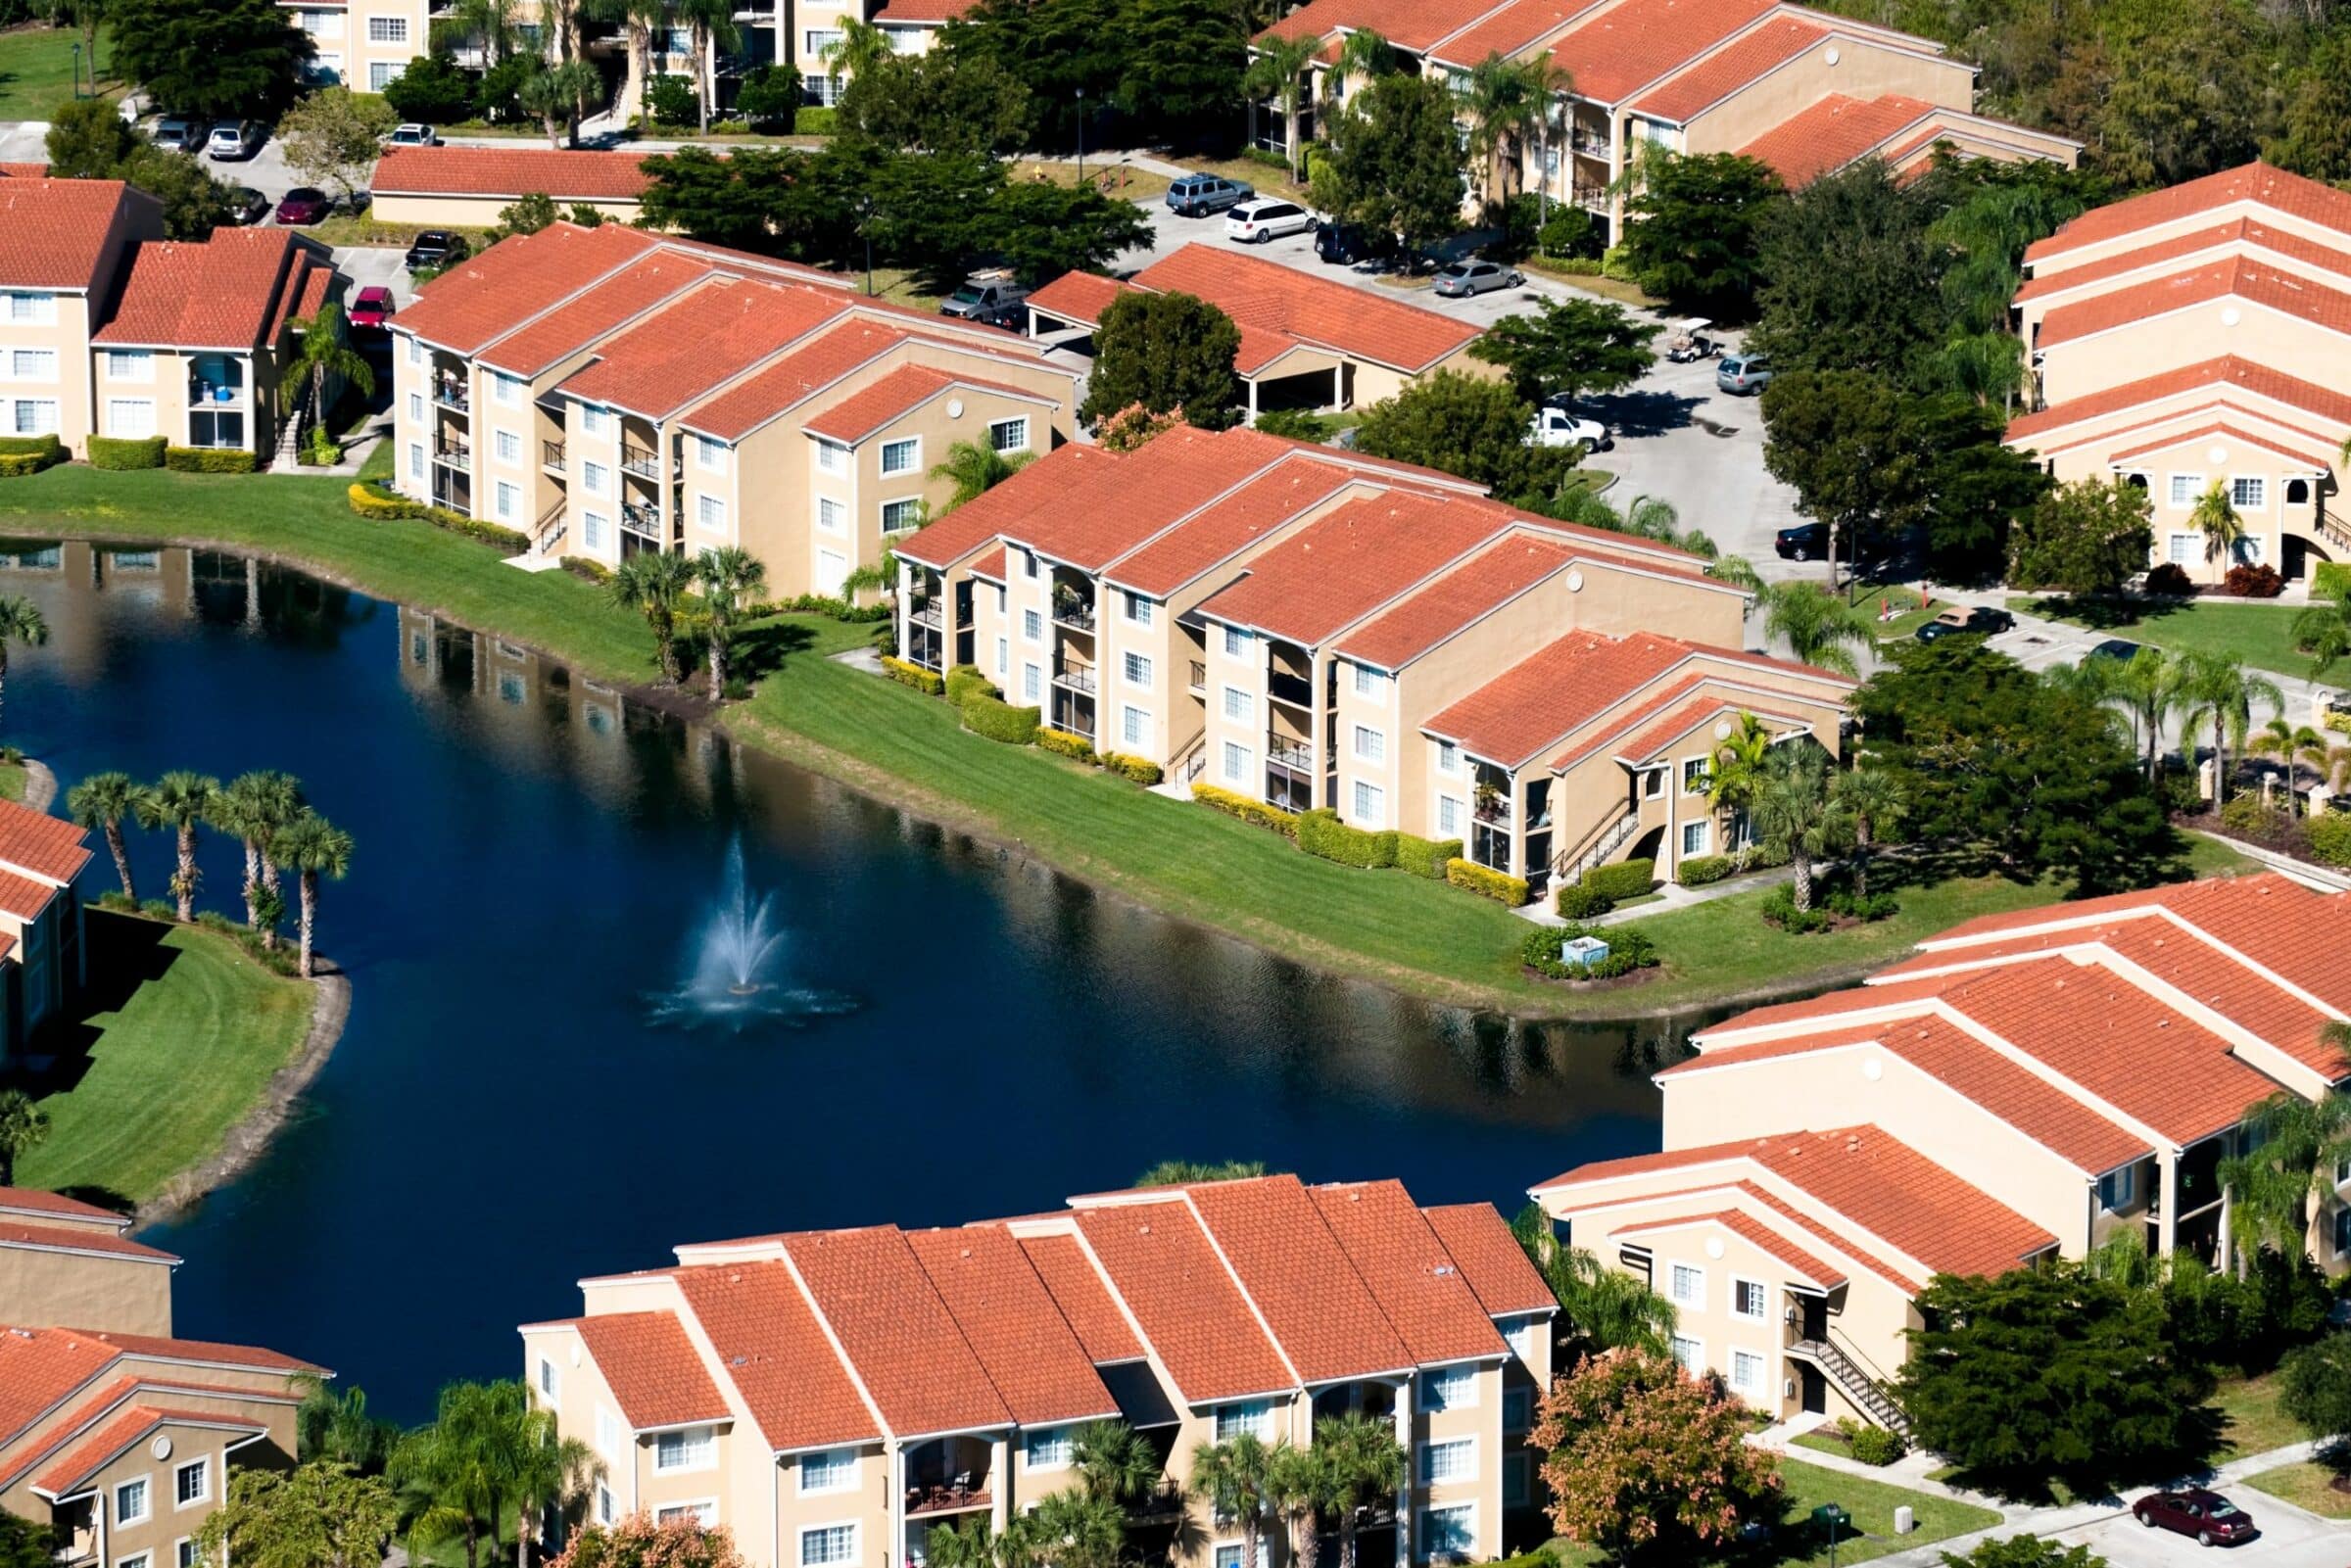 Explore why Florida condo sales decline, with insights into rising insurance costs and market trends impacting buyer preferences.